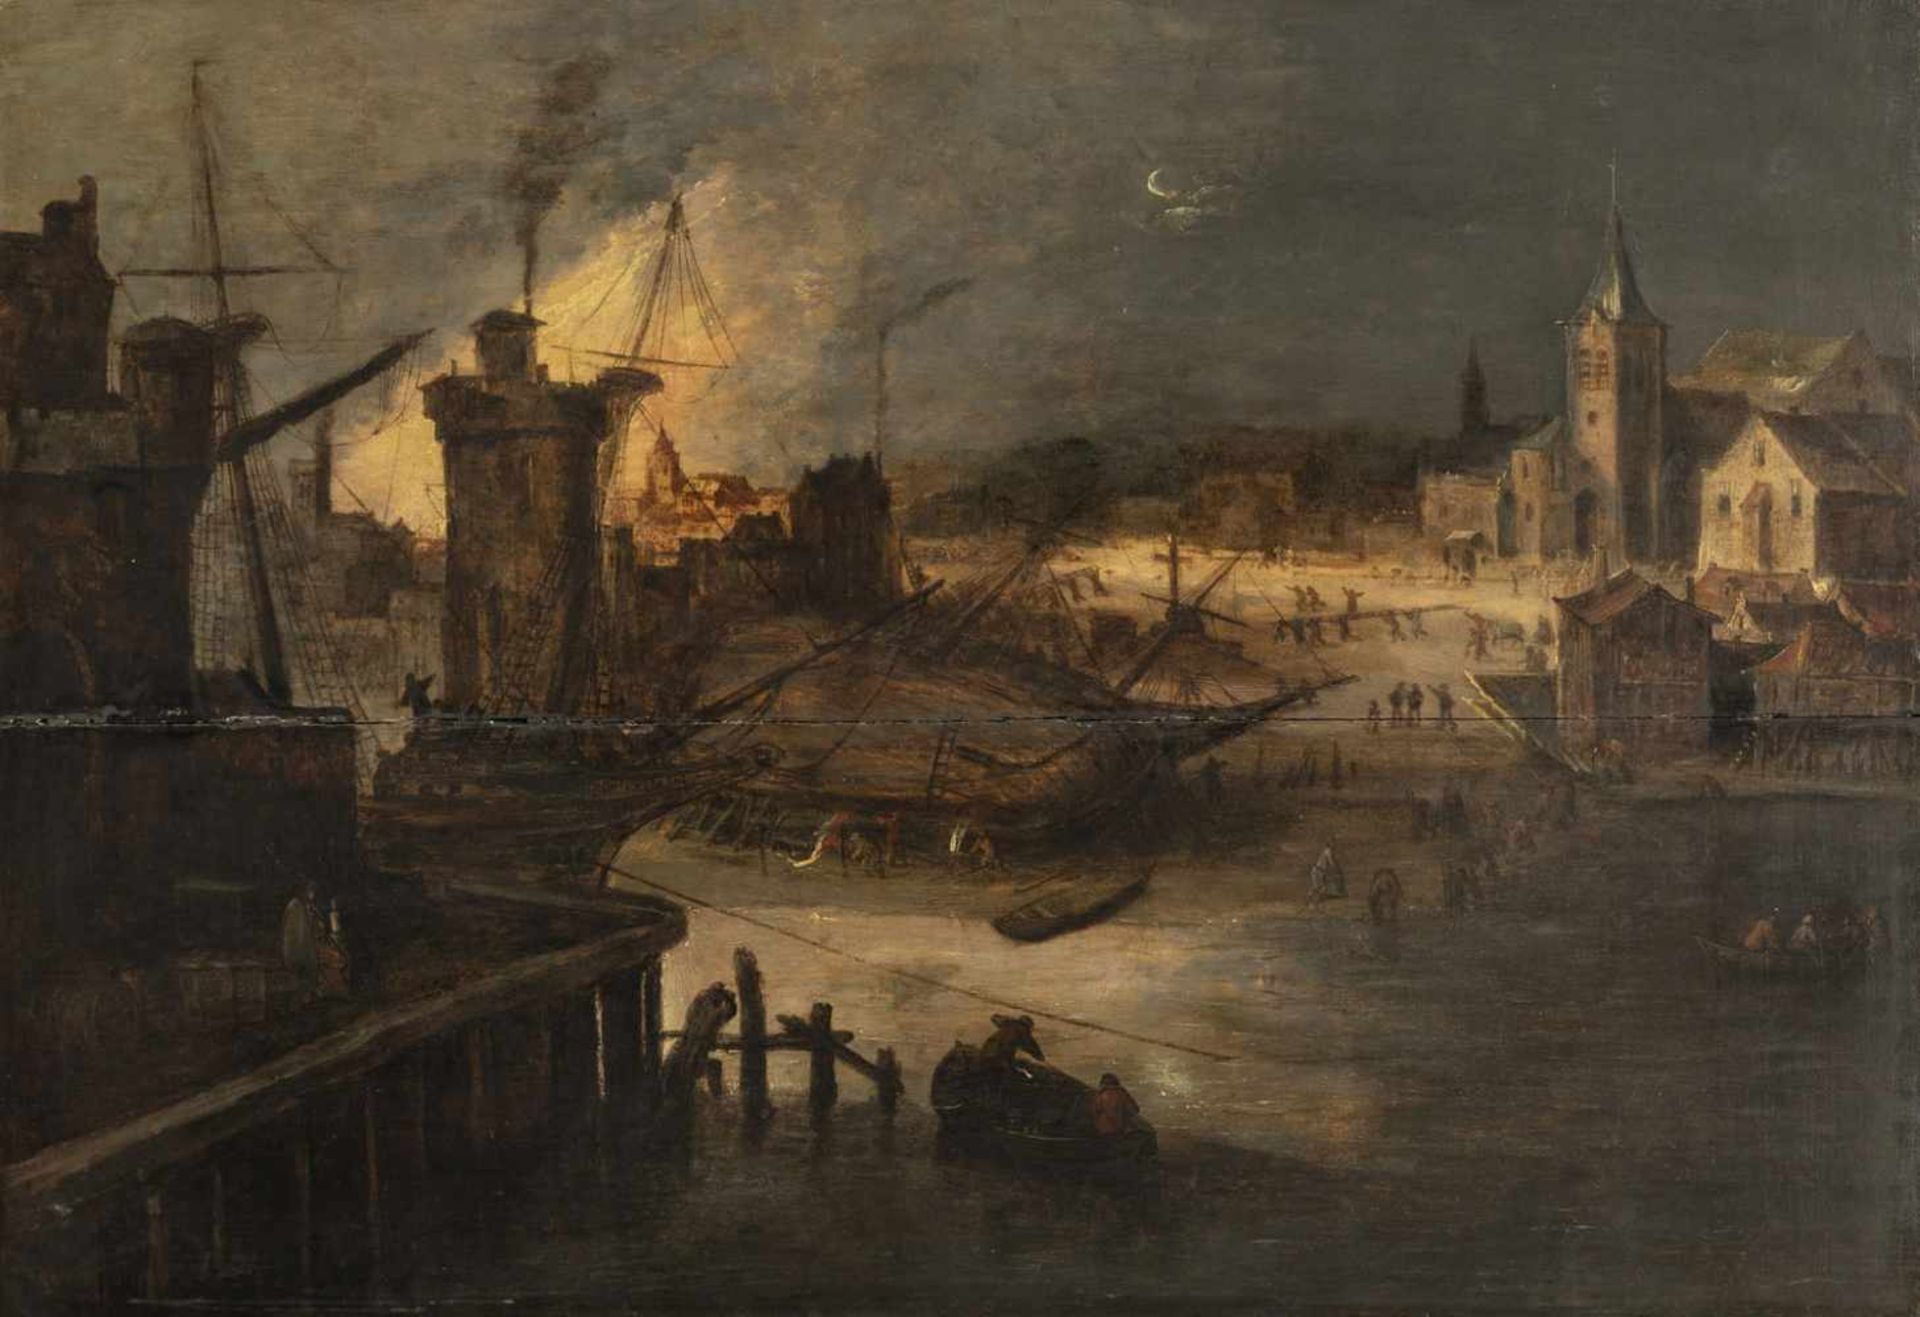 HEIL, DANIEL VAN (attr., 1604-1662). A shipyard in a harbour with a nightly conflagration. Oil/